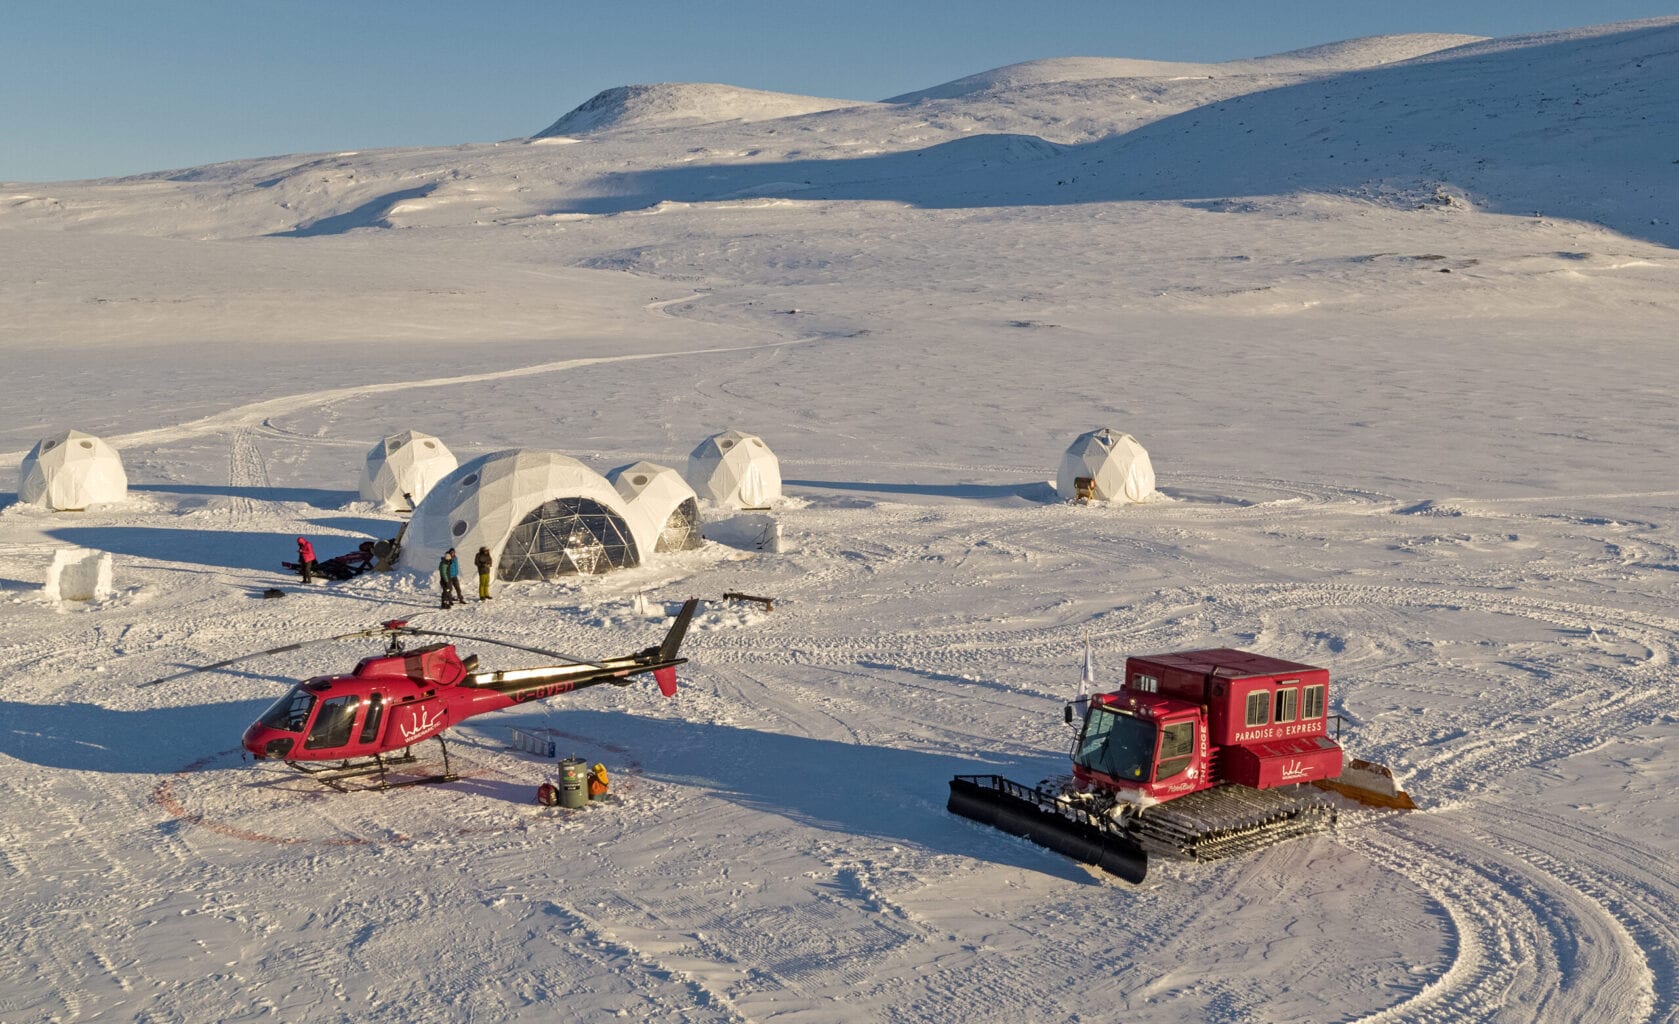 Mabey Ski Weber arctic basecamp with igloos, helicopter & snowplough